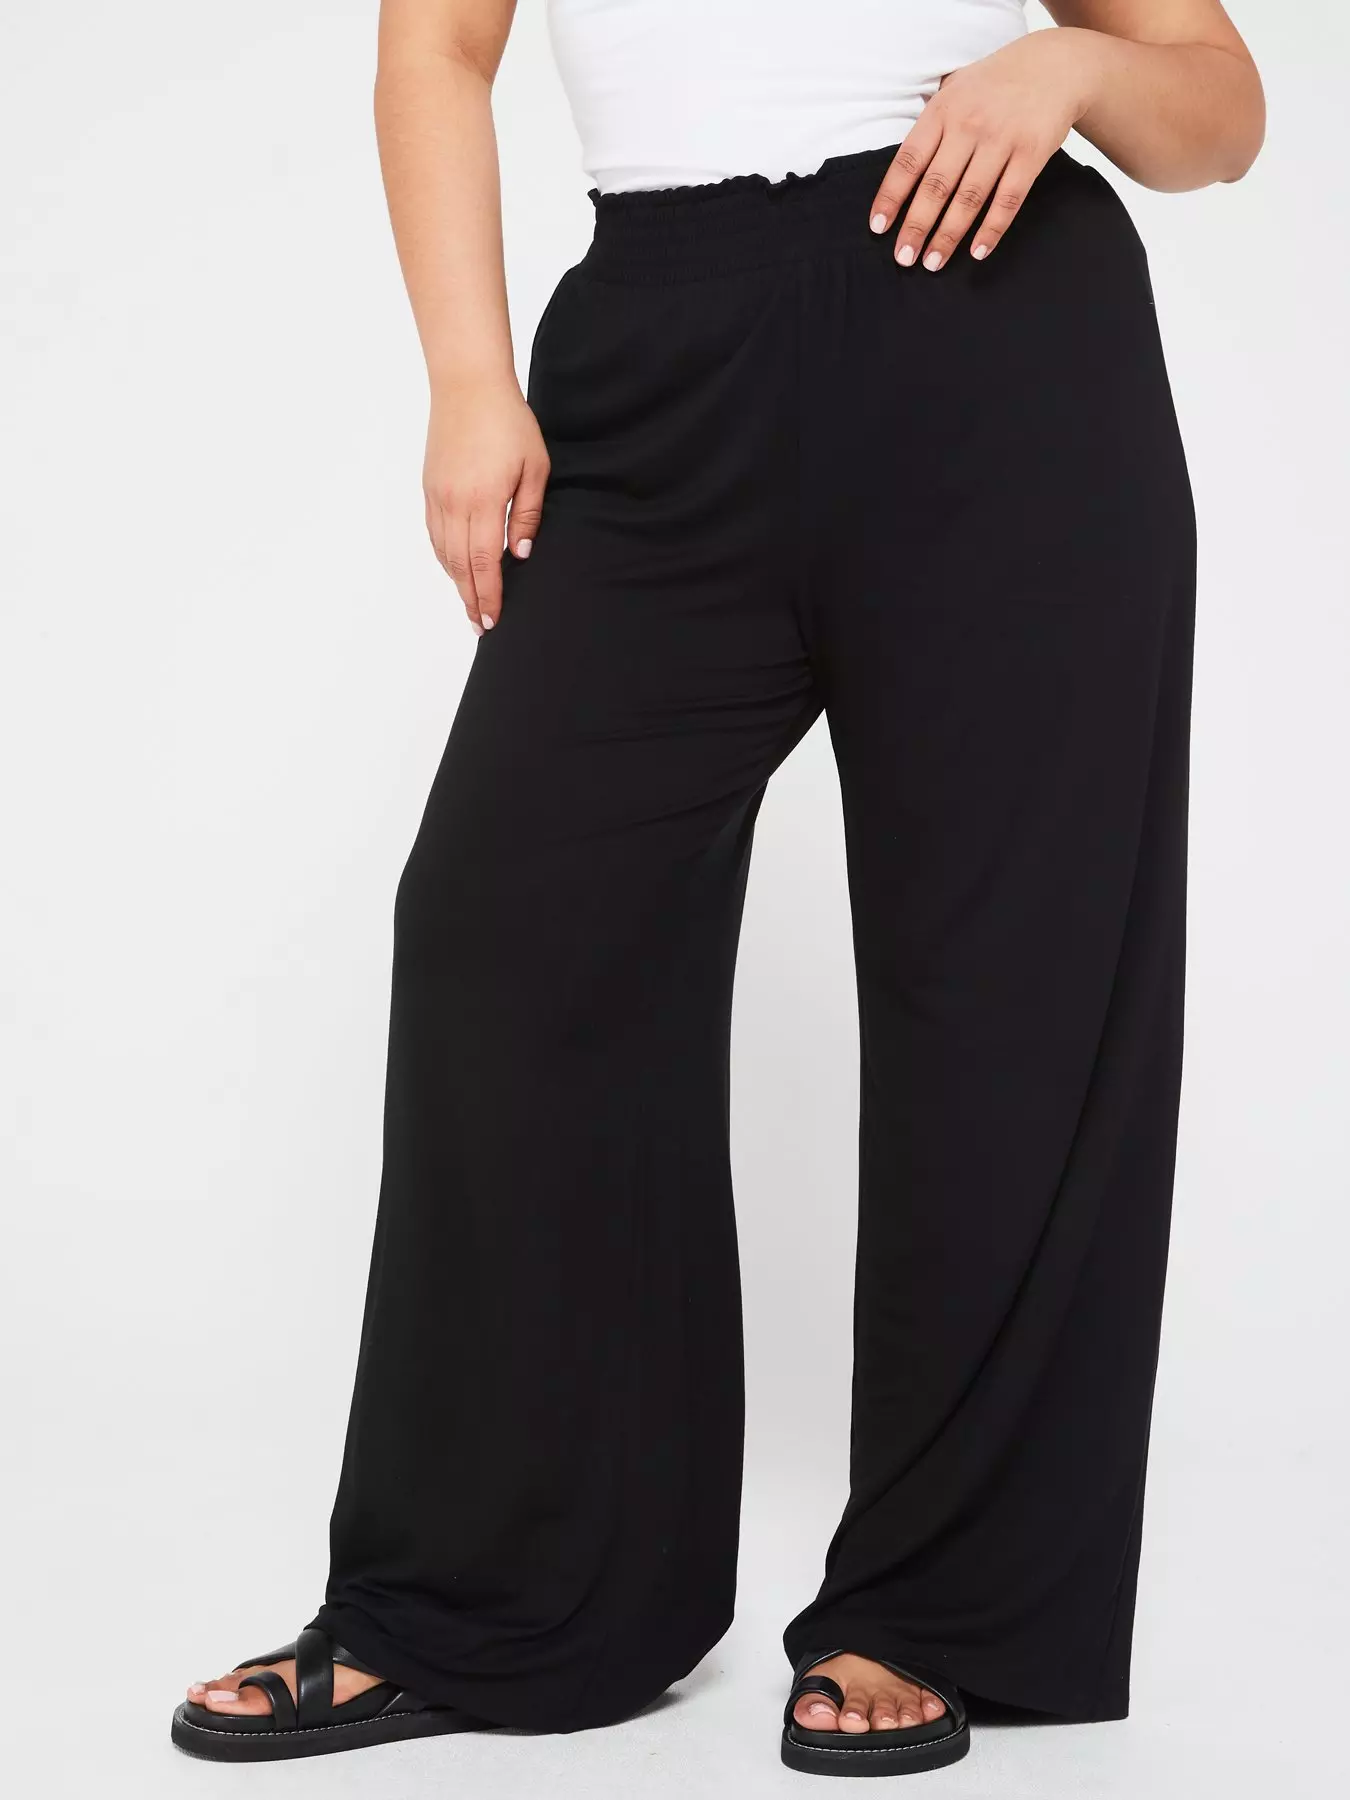 V by very curve, Trousers & leggings, Women